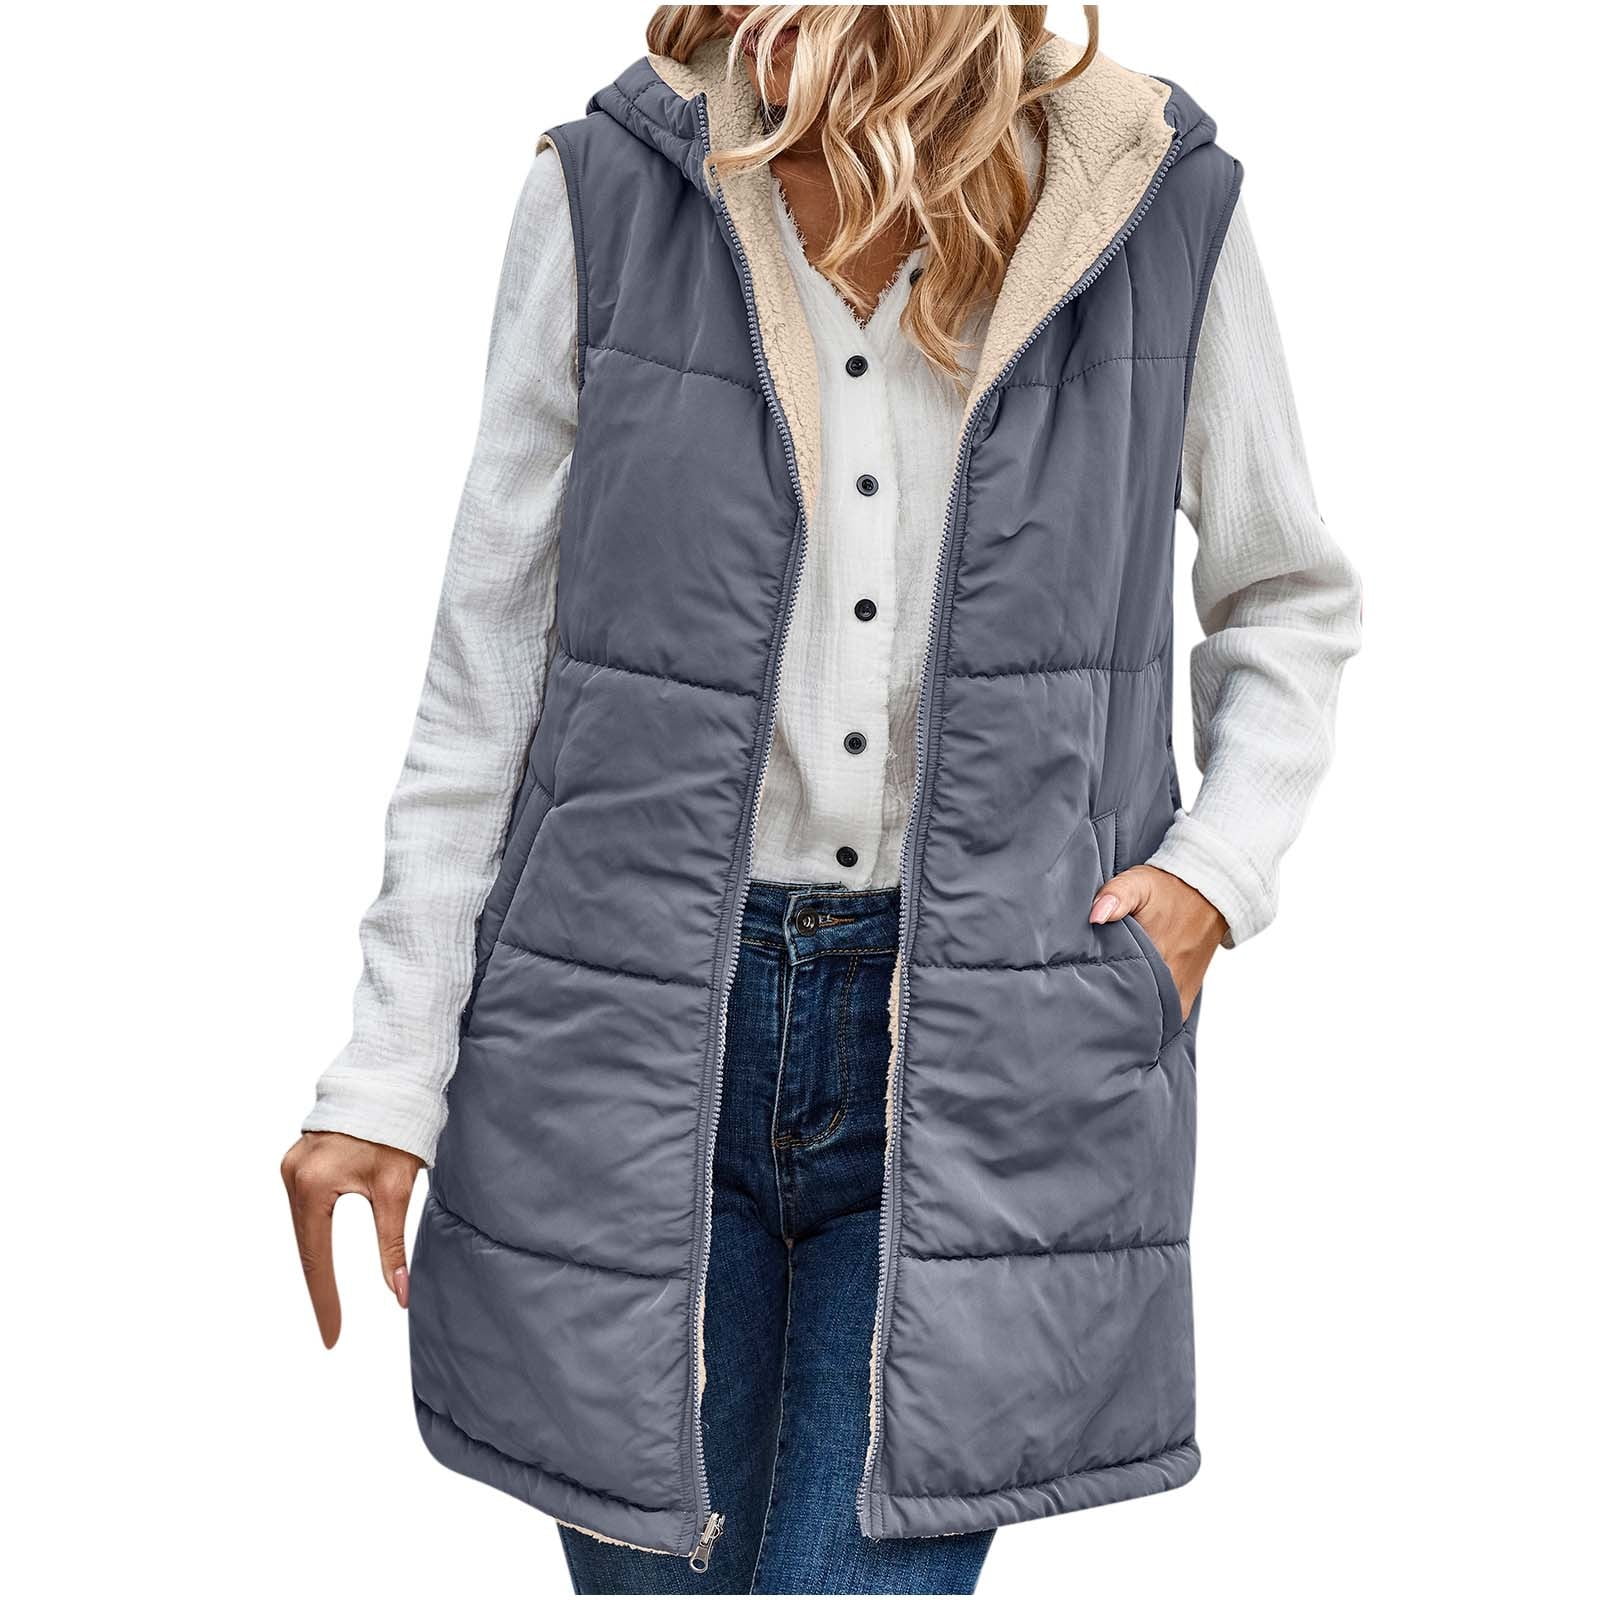 Dropship Autumn Winter Cotton Padded Waistcoat Women's Short Inner Wear  Sherpa Warm Vest Tank Tops; Pink to Sell Online at a Lower Price